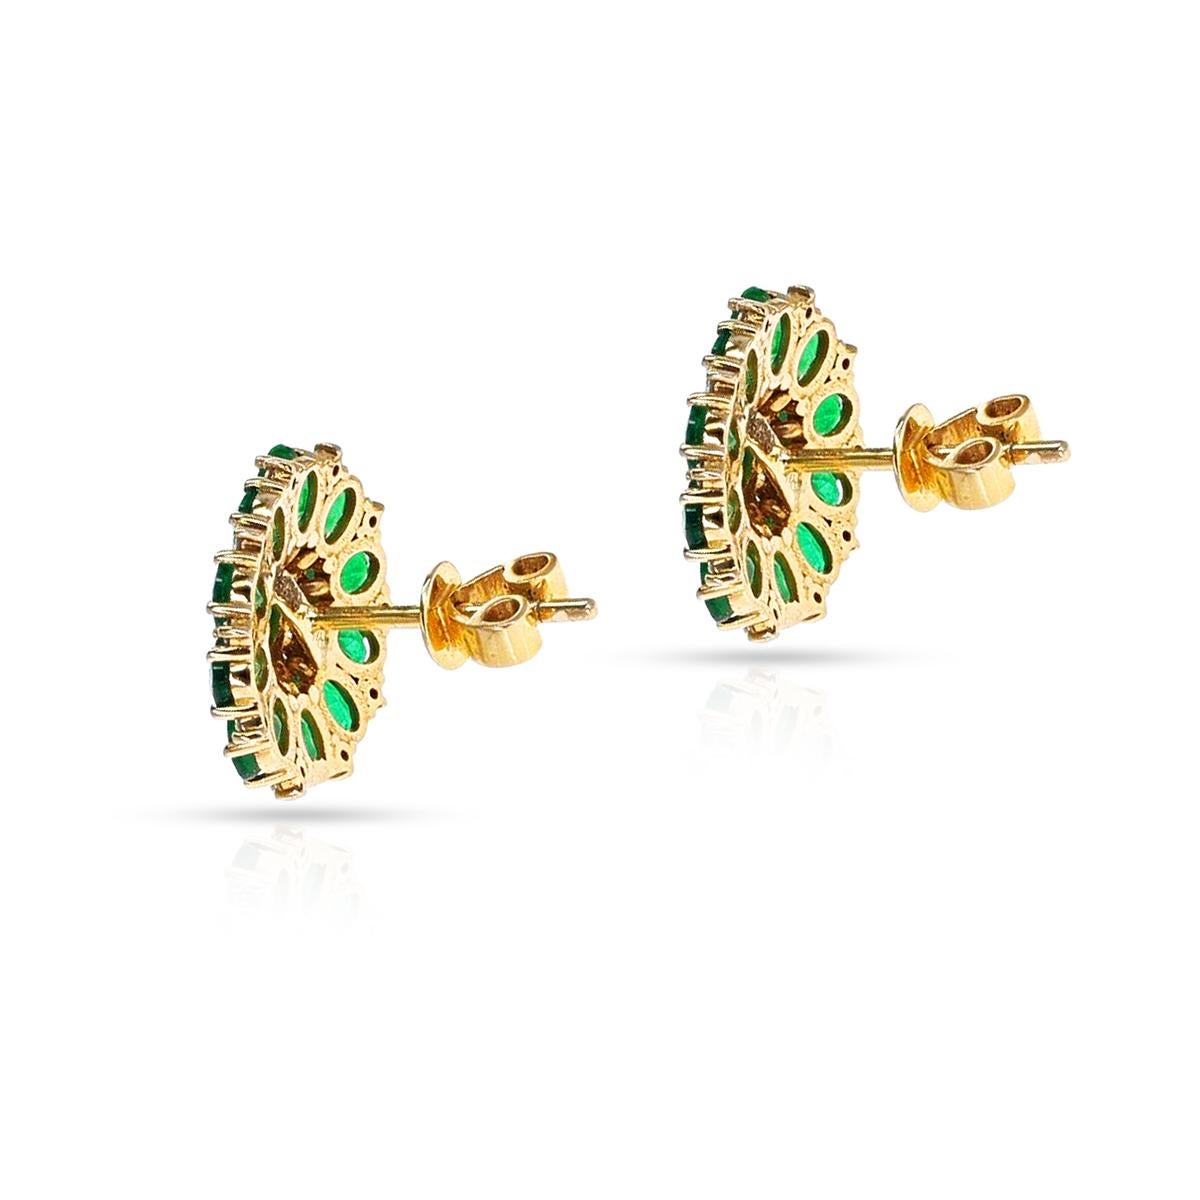 A pair of Oval Emeralds and Diamonds Floral Stud Earrings set in18k Yellow Gold. The emeralds weigh 2.95 carats and the diamonds weigh 0.30 carats. The total weight of the earring is 4.68 grams. The dimensions are 0.59